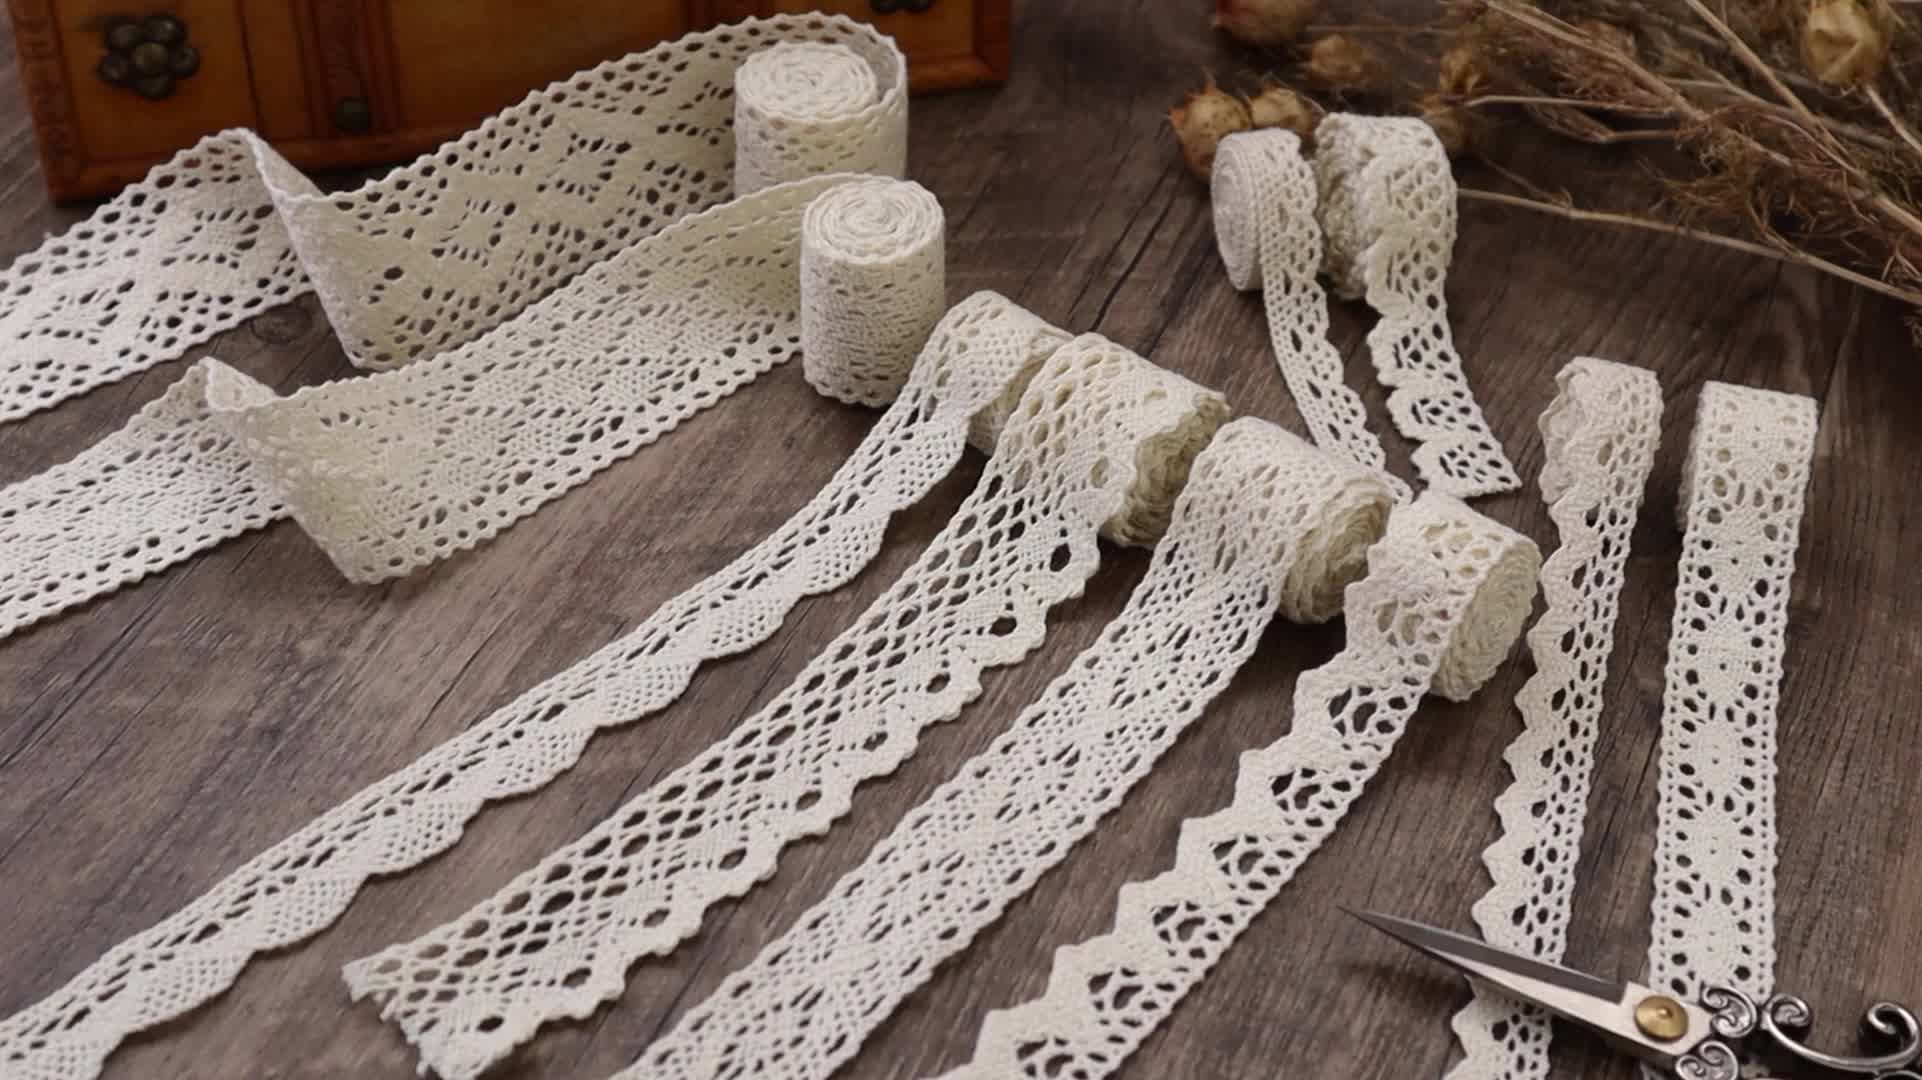 White Lace Ribbon DIY Sew Apparel Accessories Handmade Trims Wedding  Birthday Party Scrapbook Necklace Decoration DIY Crafts Garment Sewing From  Lvhome09, $1.16